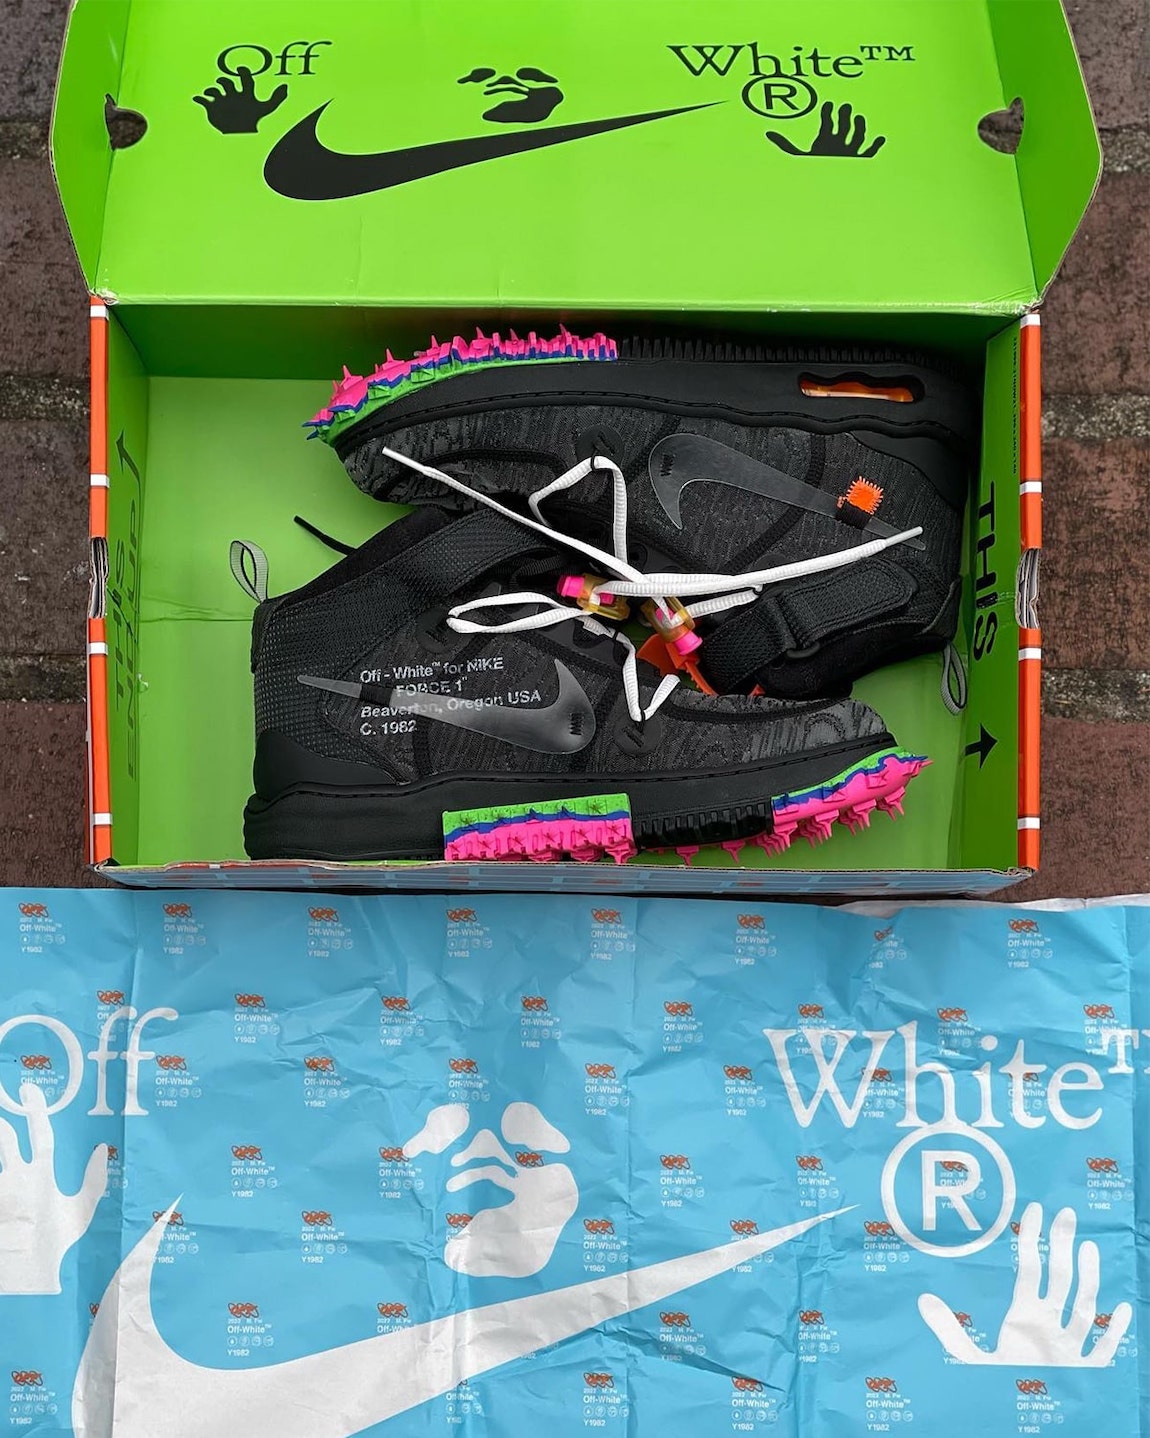 OFF-WHITE,Nike,Air Force 1 Mid  设计一言难尽！OFF-WHITE x Nike Air Force 1 Mid 最新实物曝光！